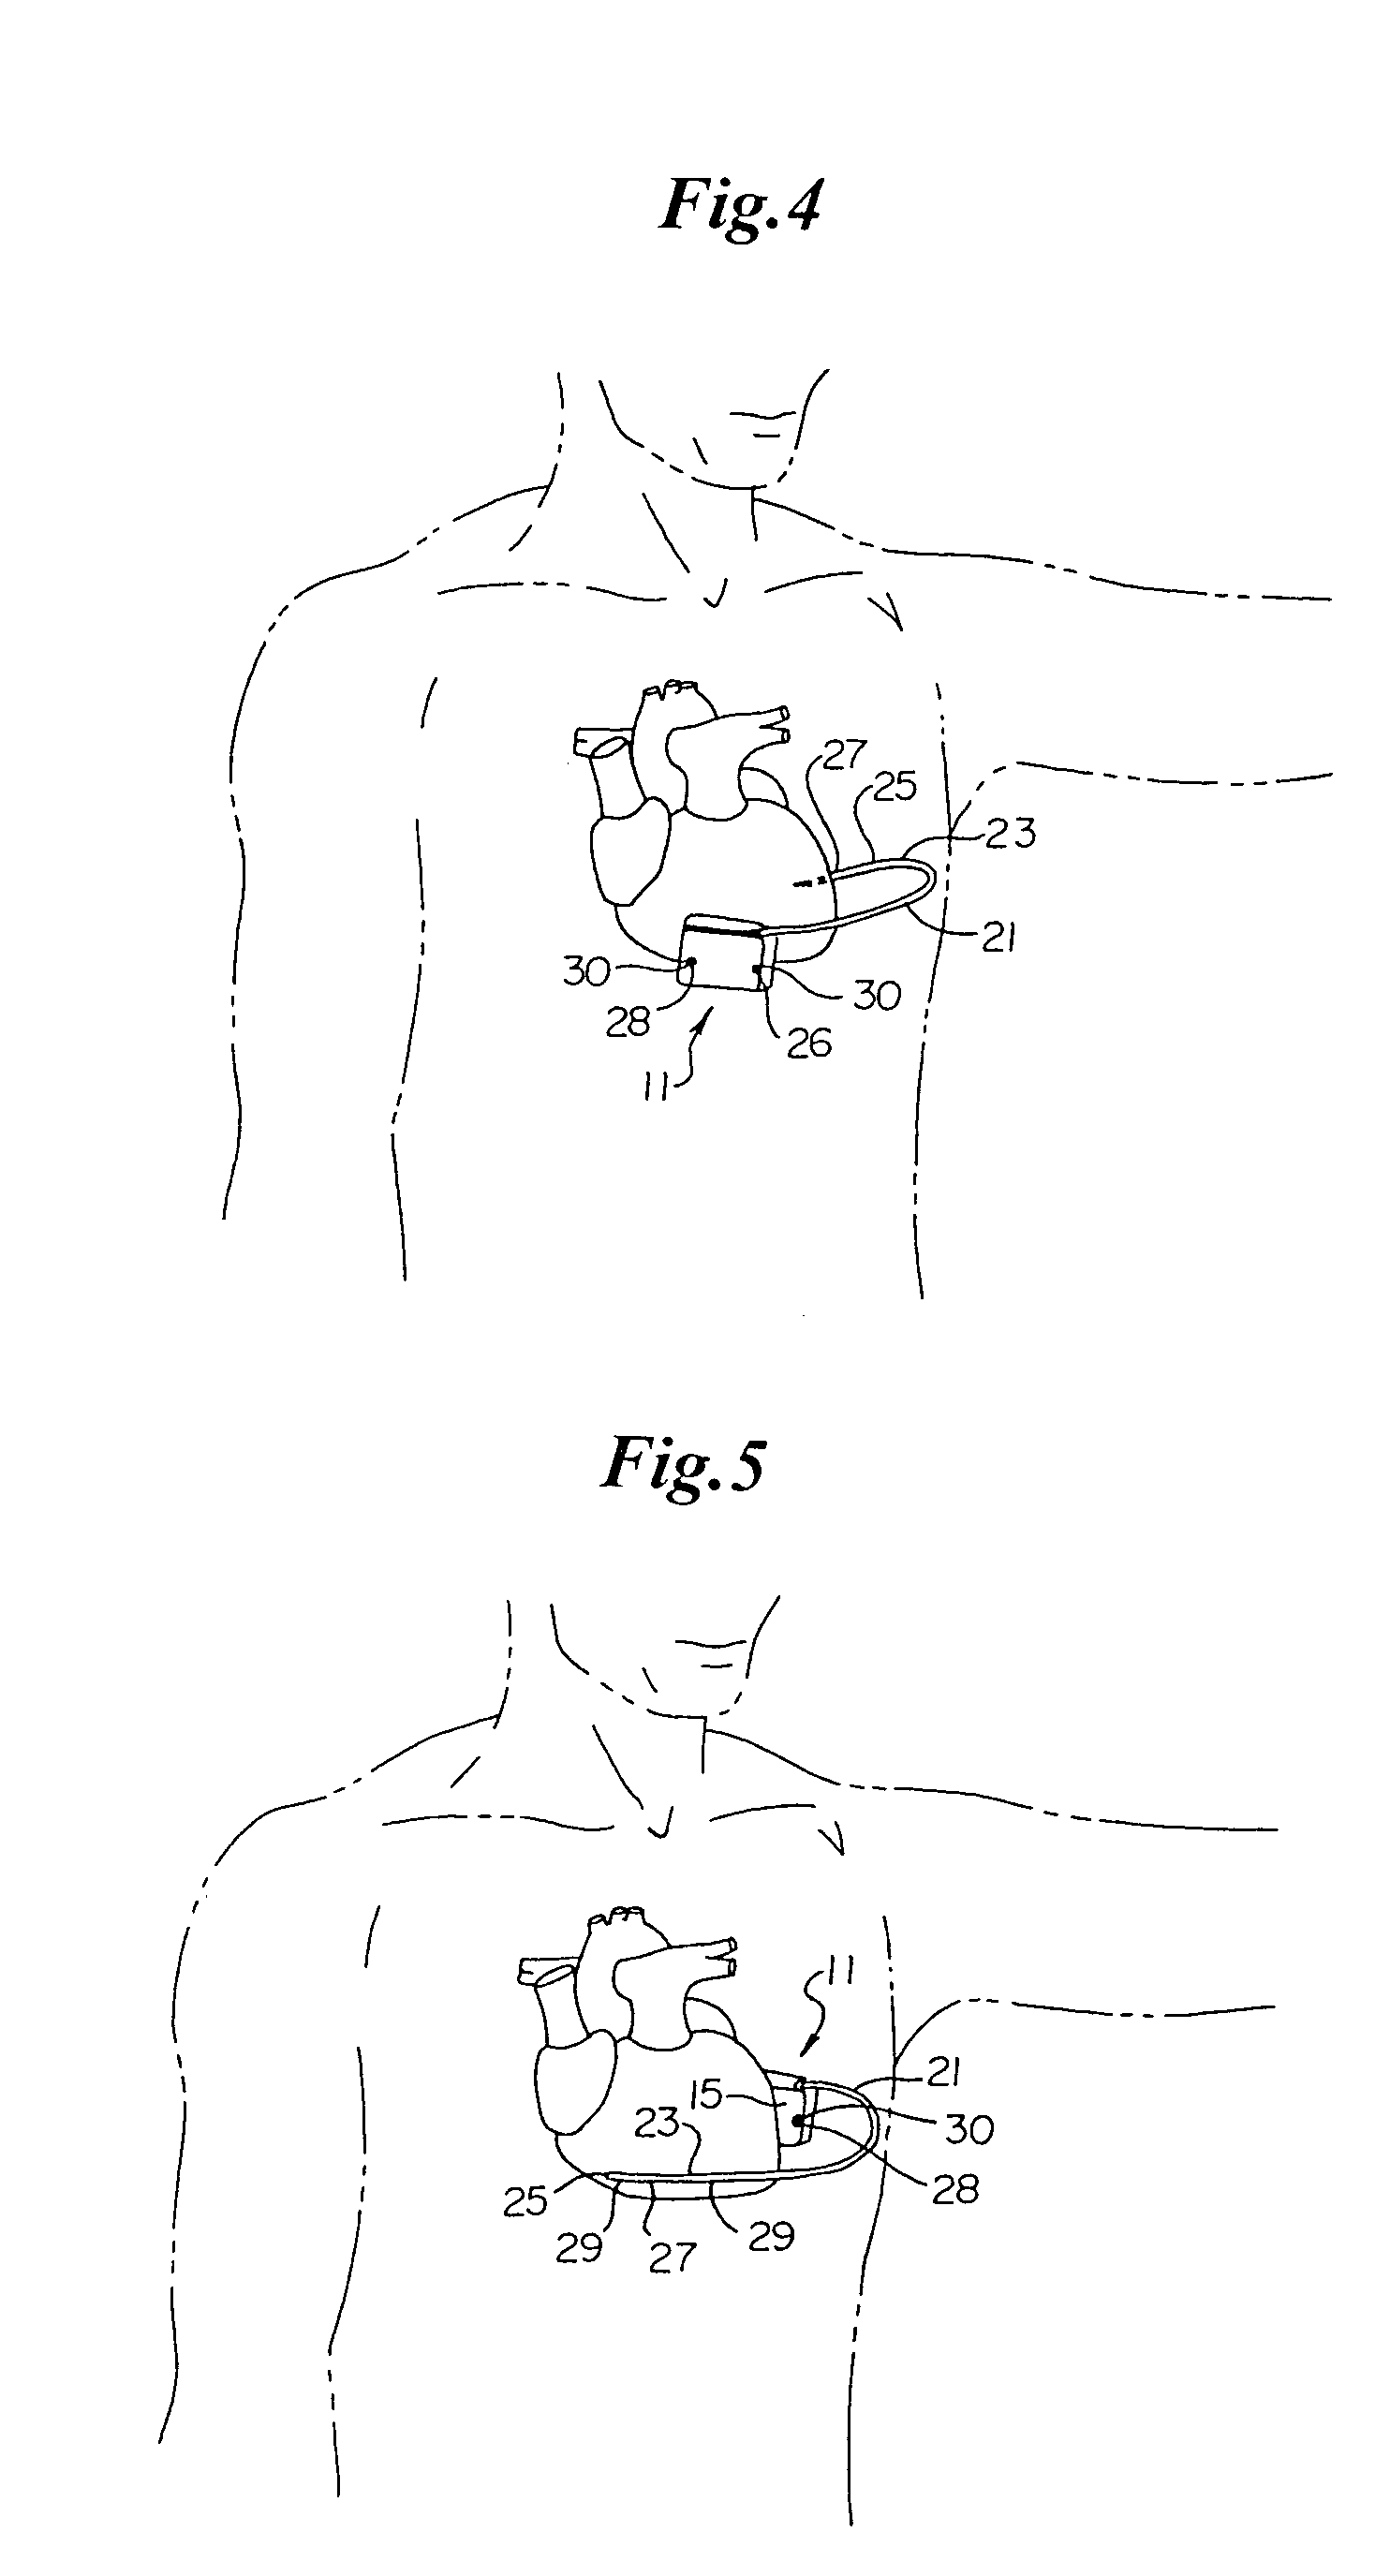 Duckbill-shaped implantable cardioverter-defibrillator canister and method of use